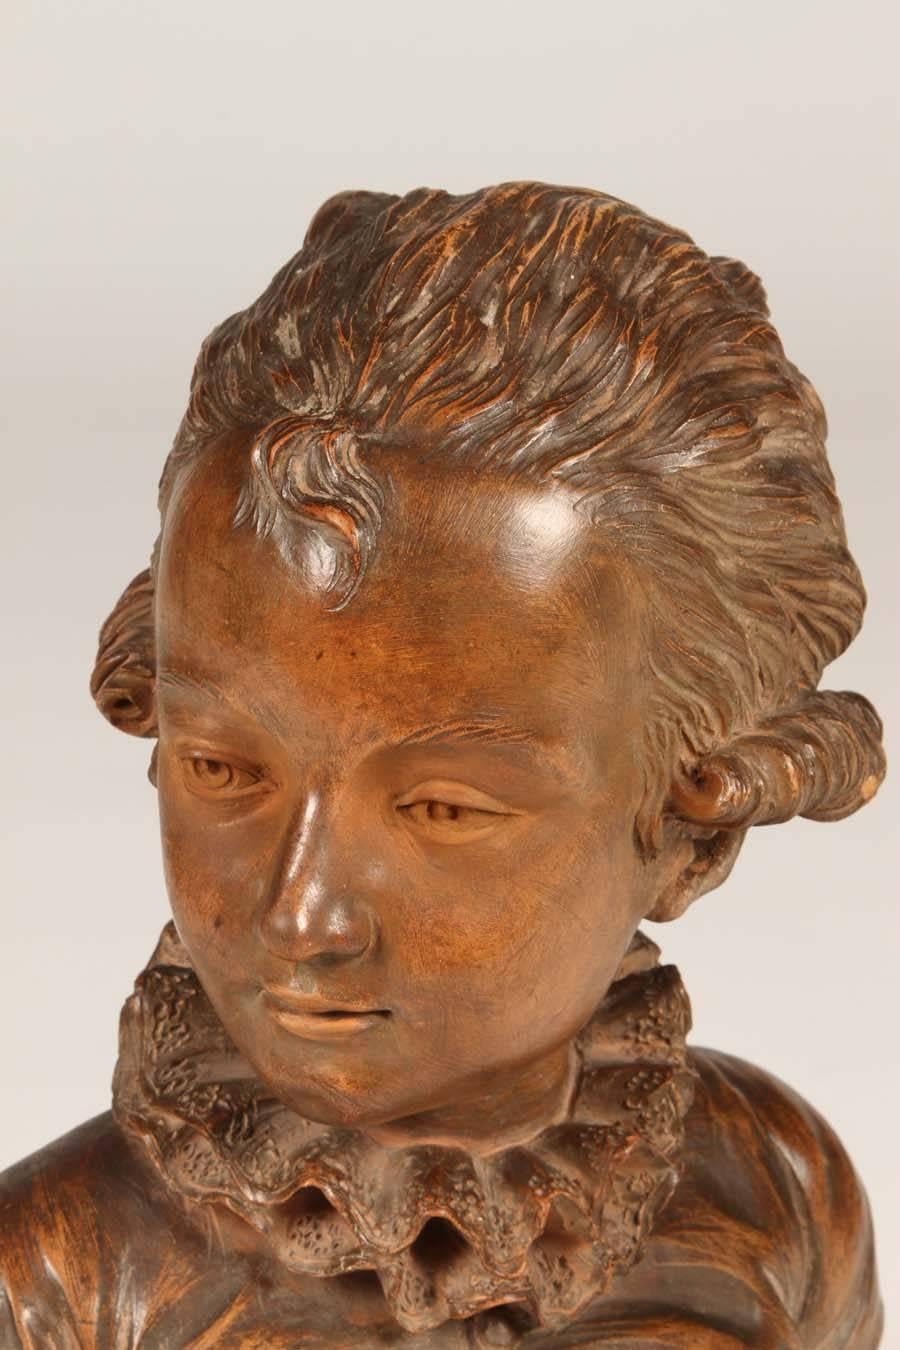 This absolutely lovely terra cotta bust representing Mozart as a child is from the 19th century. It is in excellent condition for a piece of it's age. It sits upon a turned walnut base. This is truly a treasure!